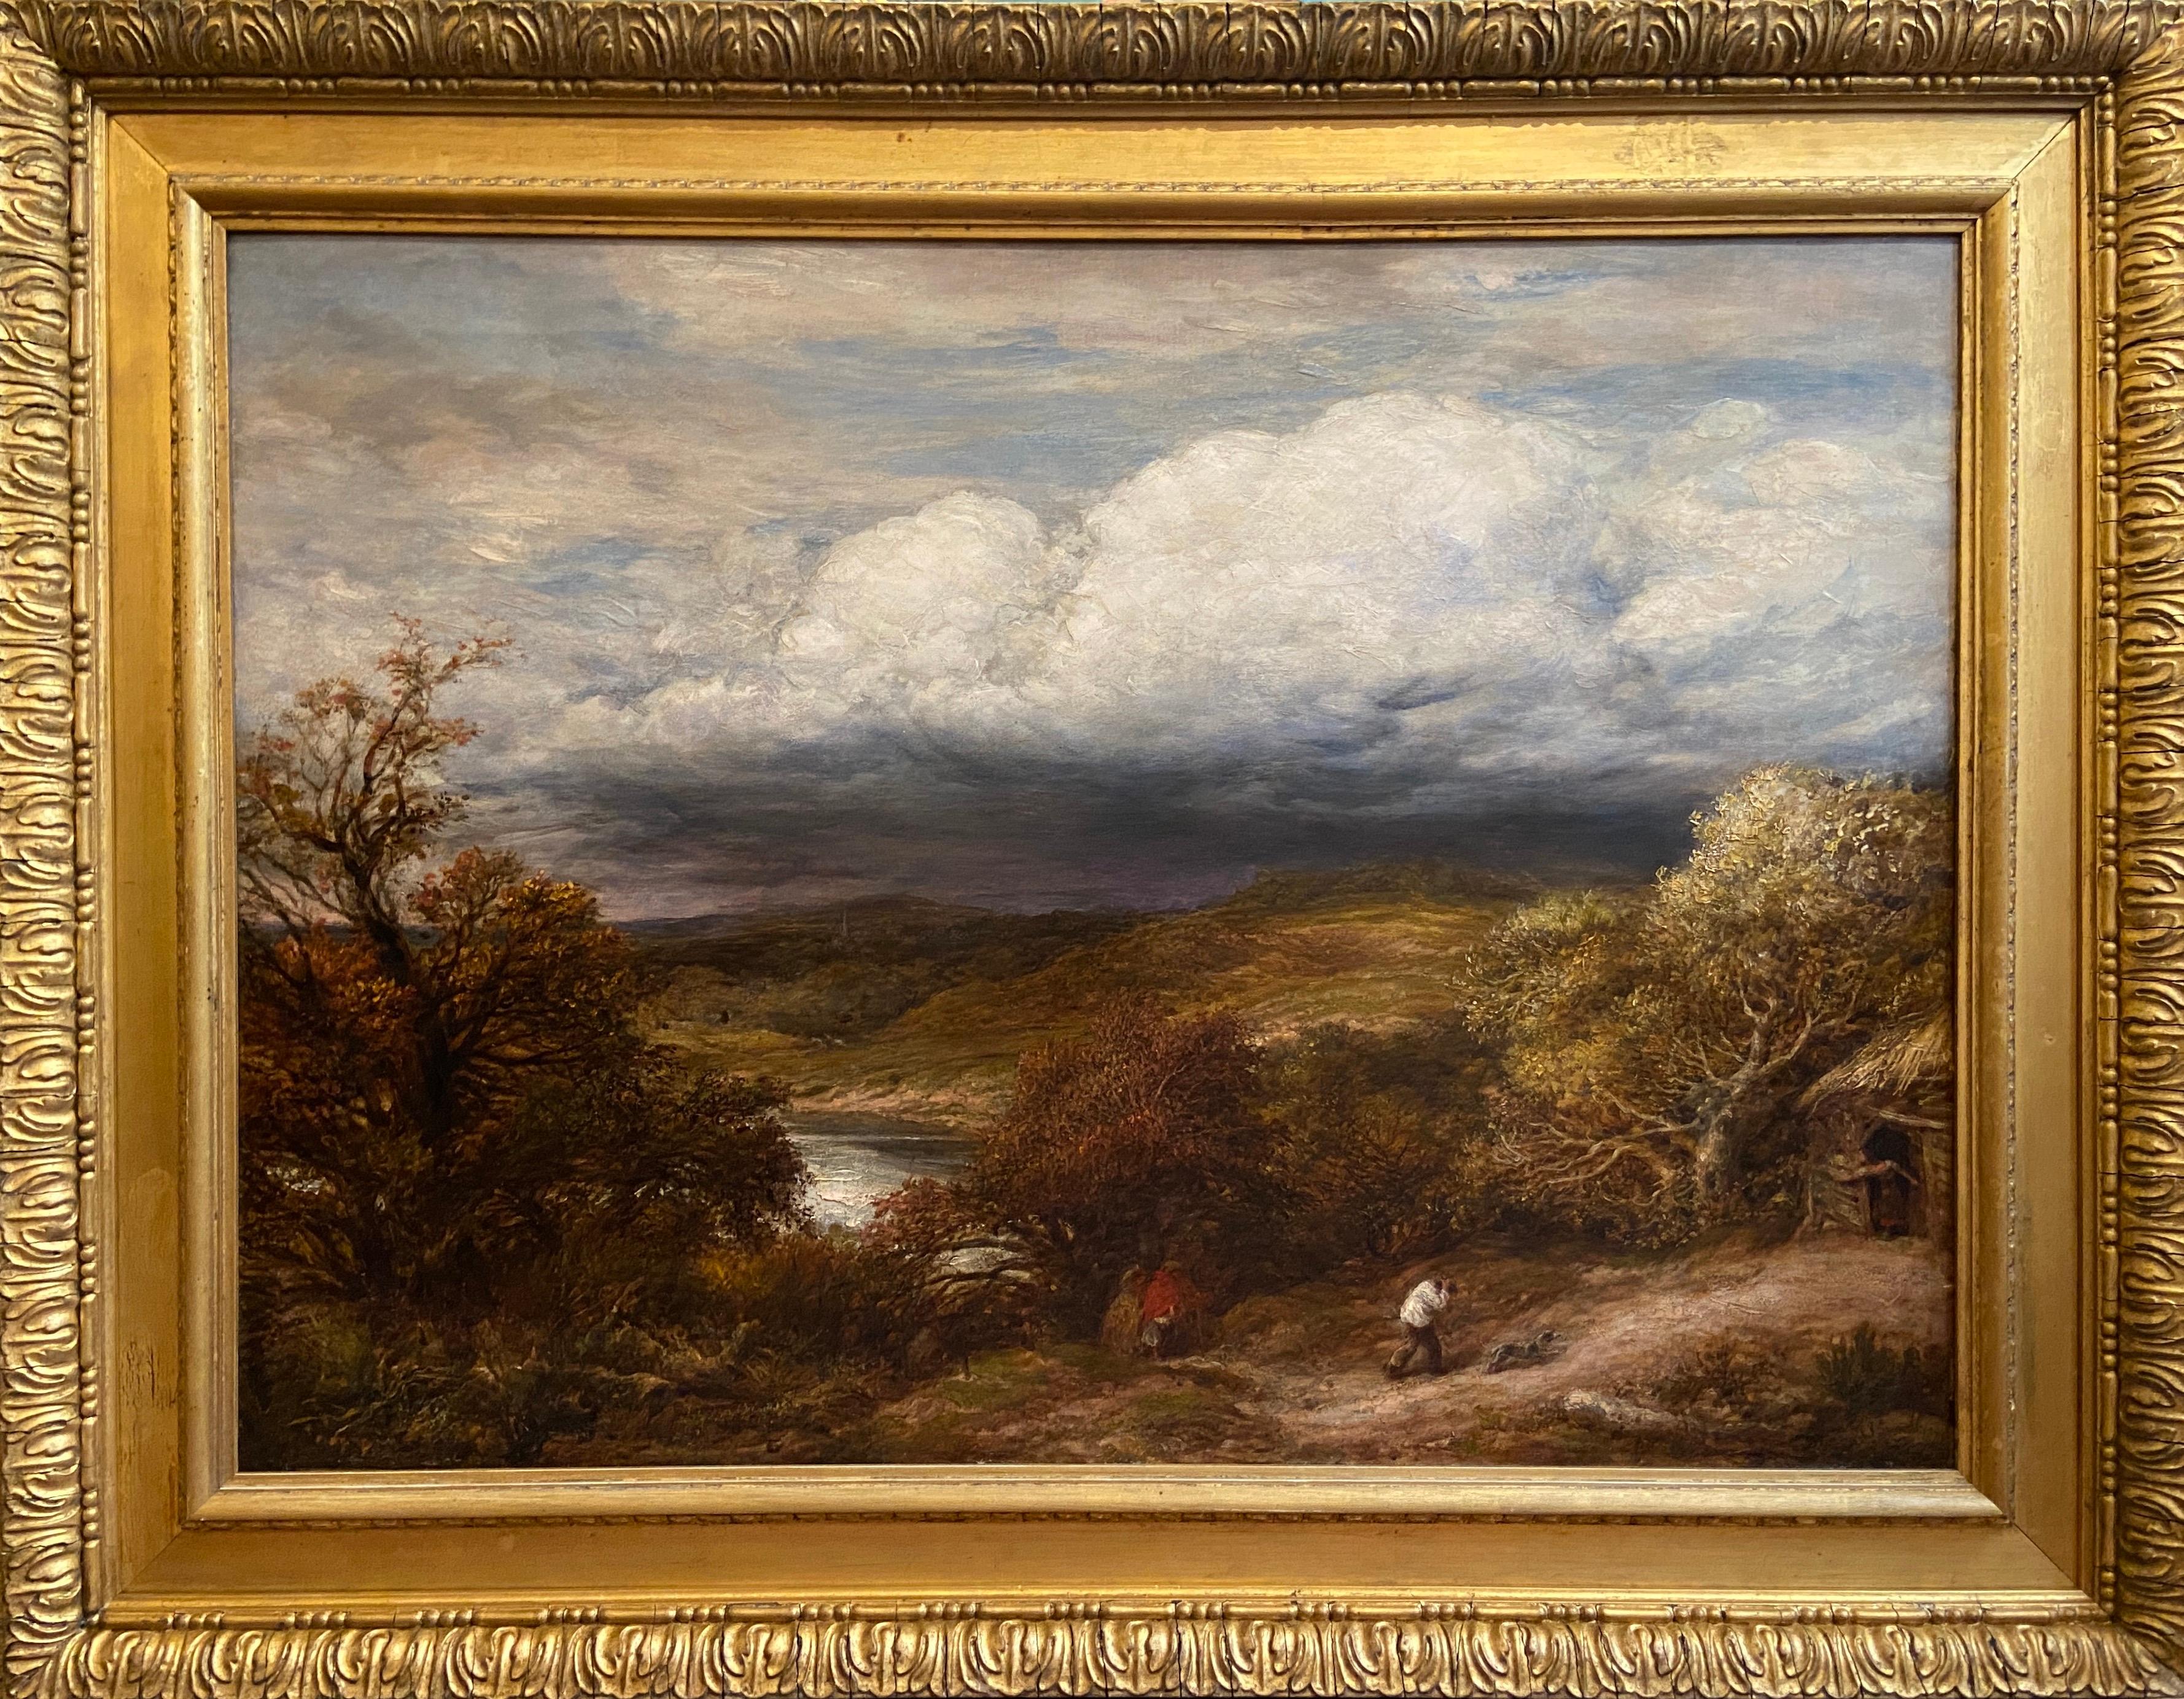 John Linnell
1792 - 1882
Approaching Storm
Oil on canvas, signed & dated lower right '1870'
Image size: 29 x 39 inches (74 x 99 cm)
Original gilt Watts frame


John Linnell (16 June 1792 – 20 January 1882) was an English landscape and portrait